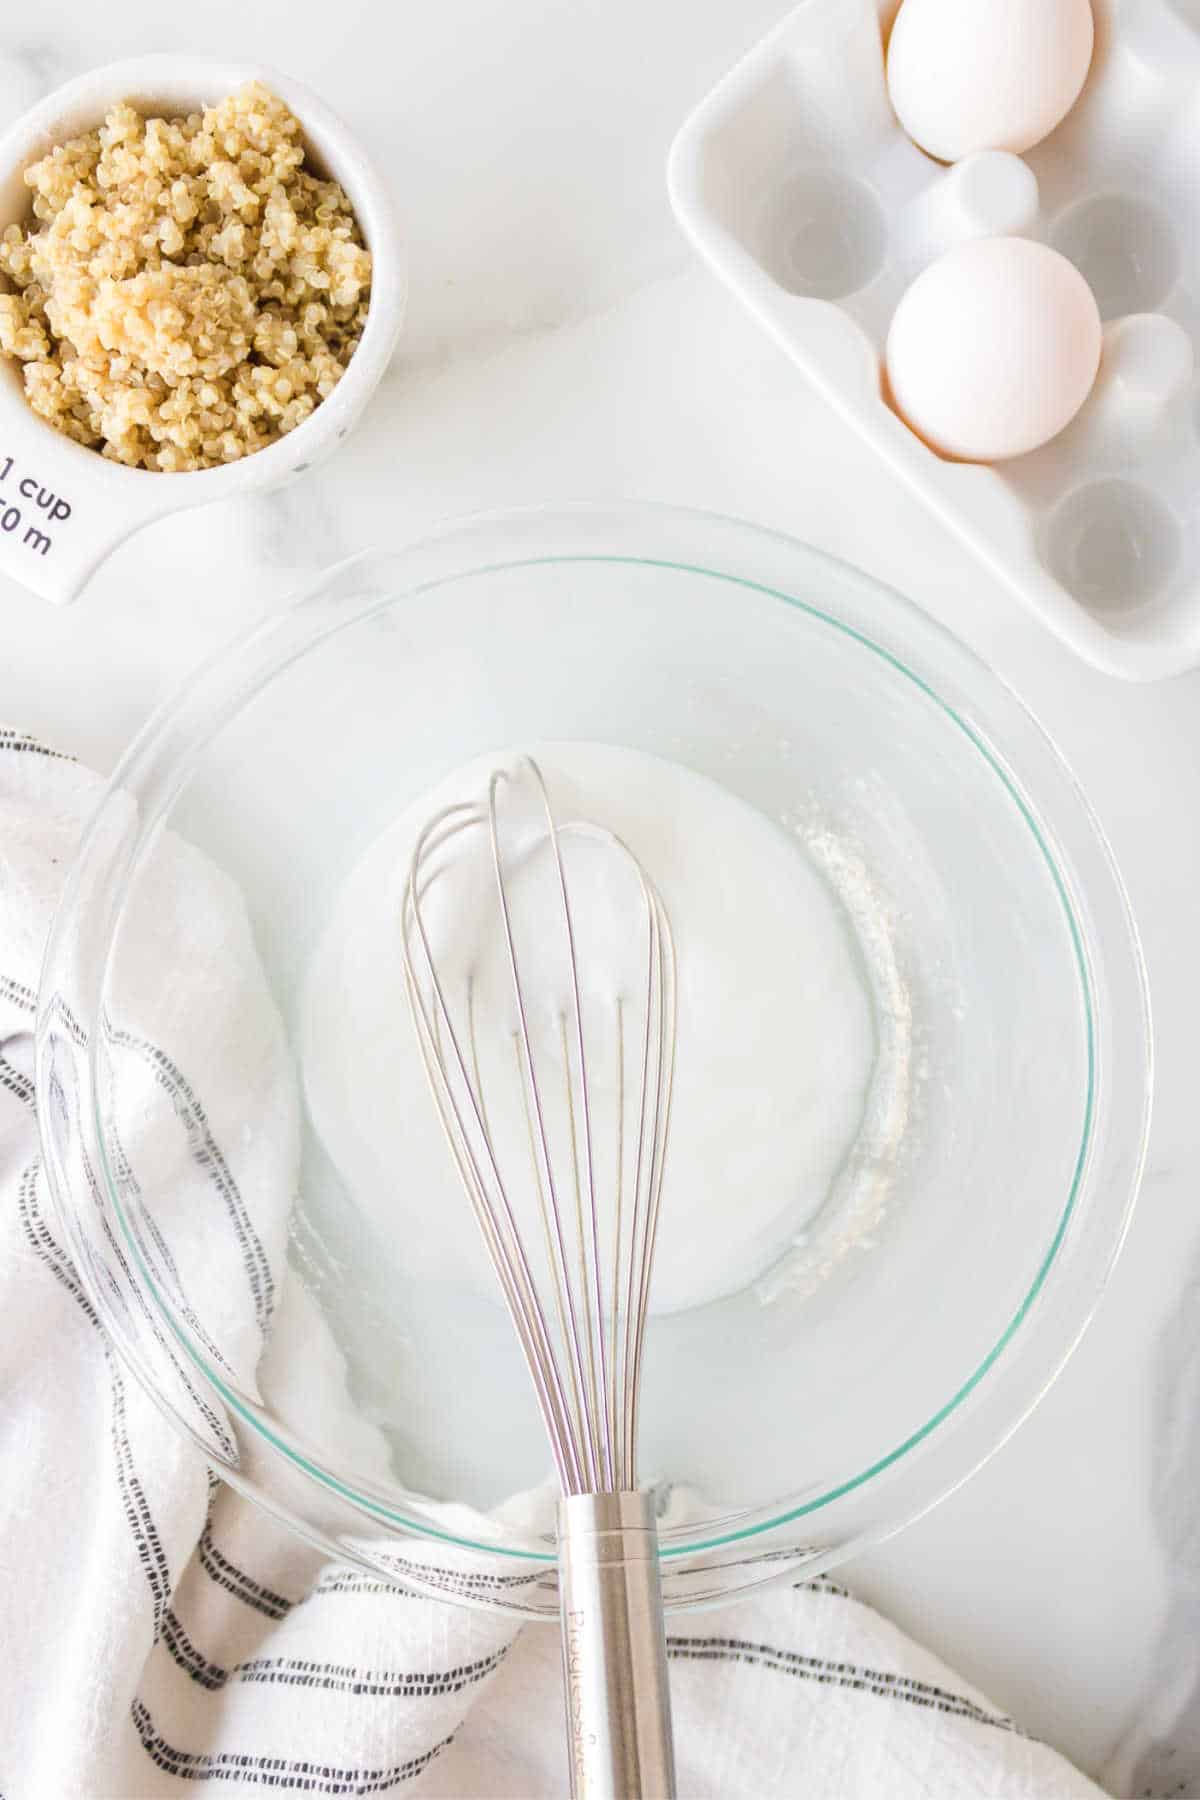 Melted coconut oil and Greek yogurt whisked together in a glass mixing bowl. 